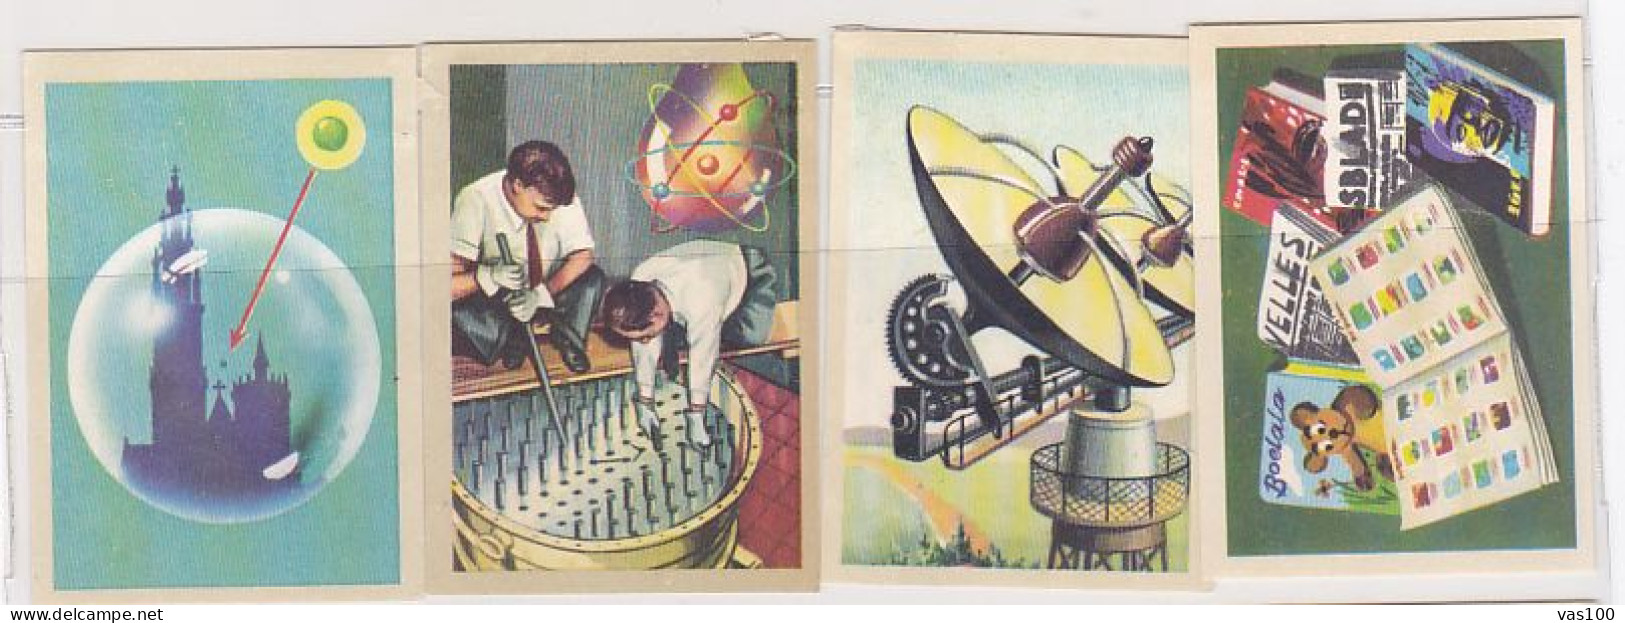 TRADE CARDS, CHOCOLATE, JACQUES, SCIENCE, ATOM ENERGY, SOLAR ENERGY, PRINTINGS, 4X - Jacques